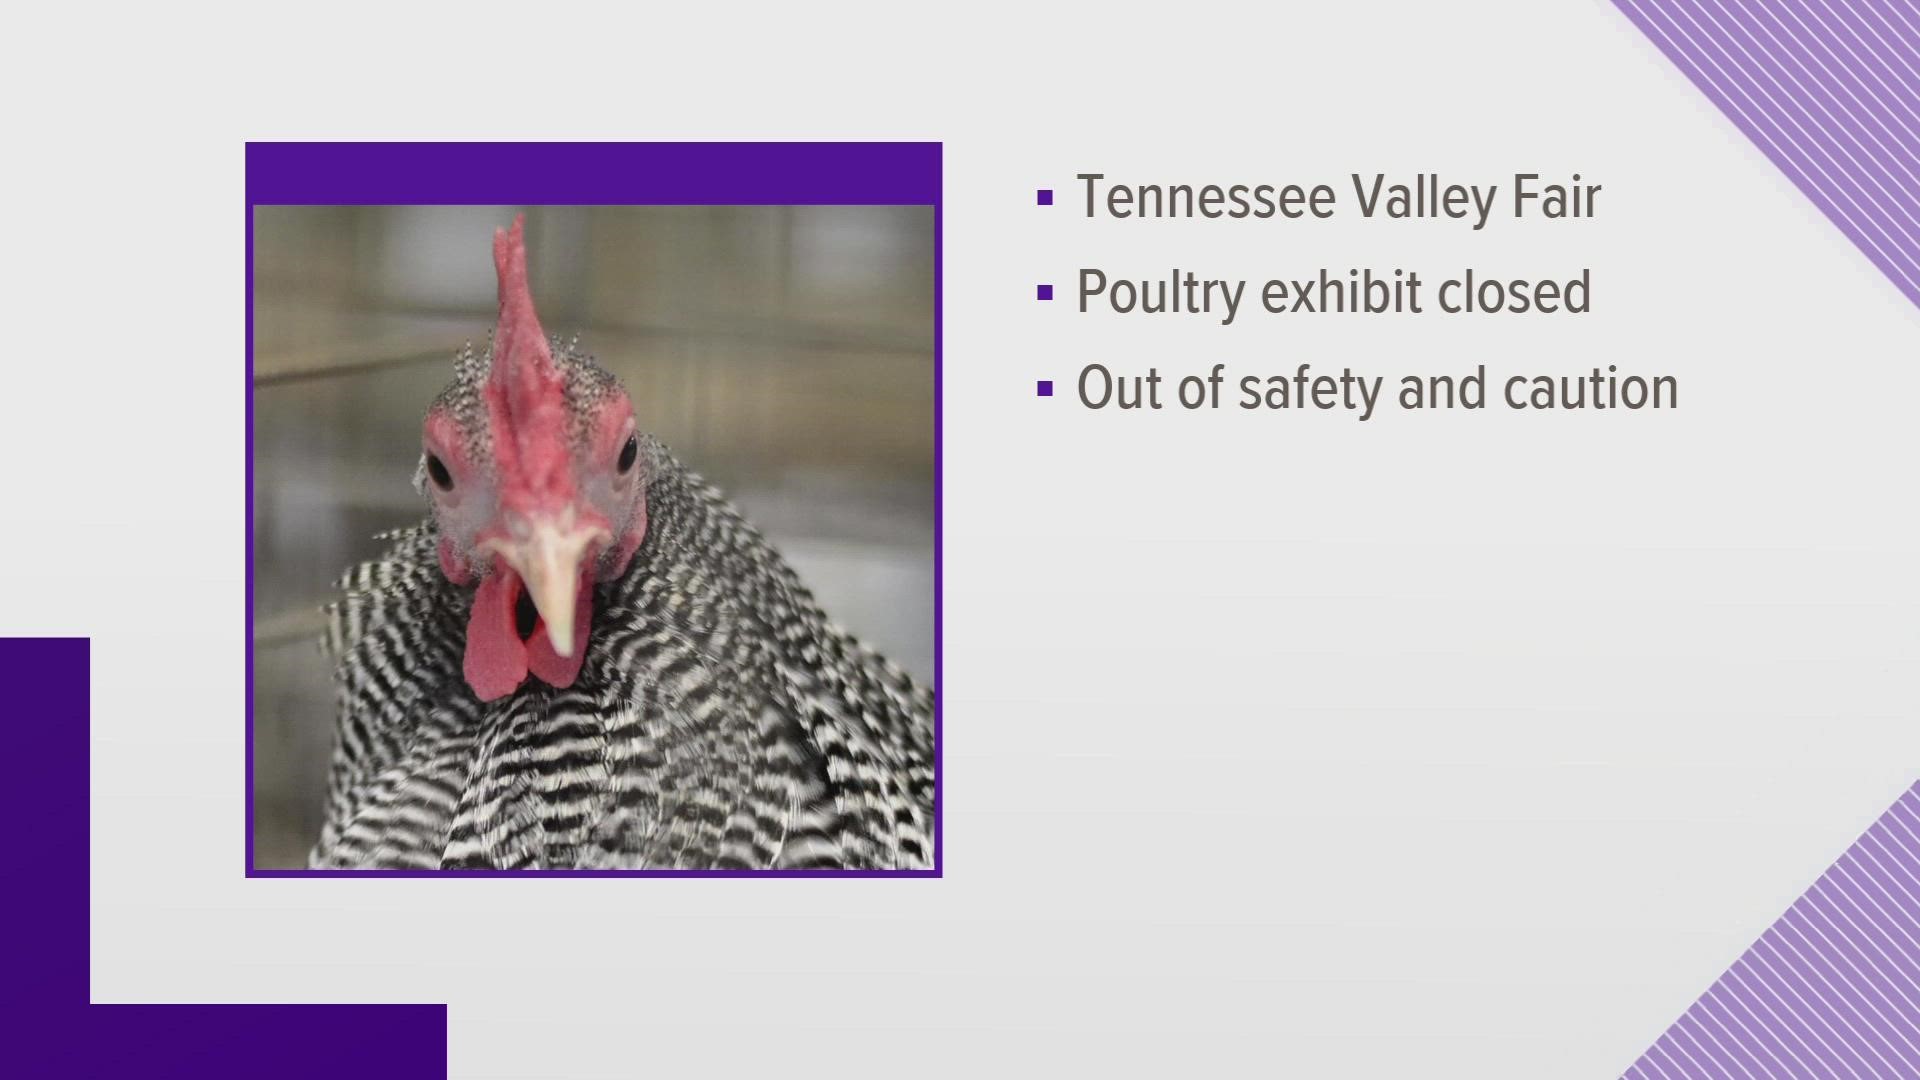 No cases of the bird flu have been reported in East Tennessee as of Friday.